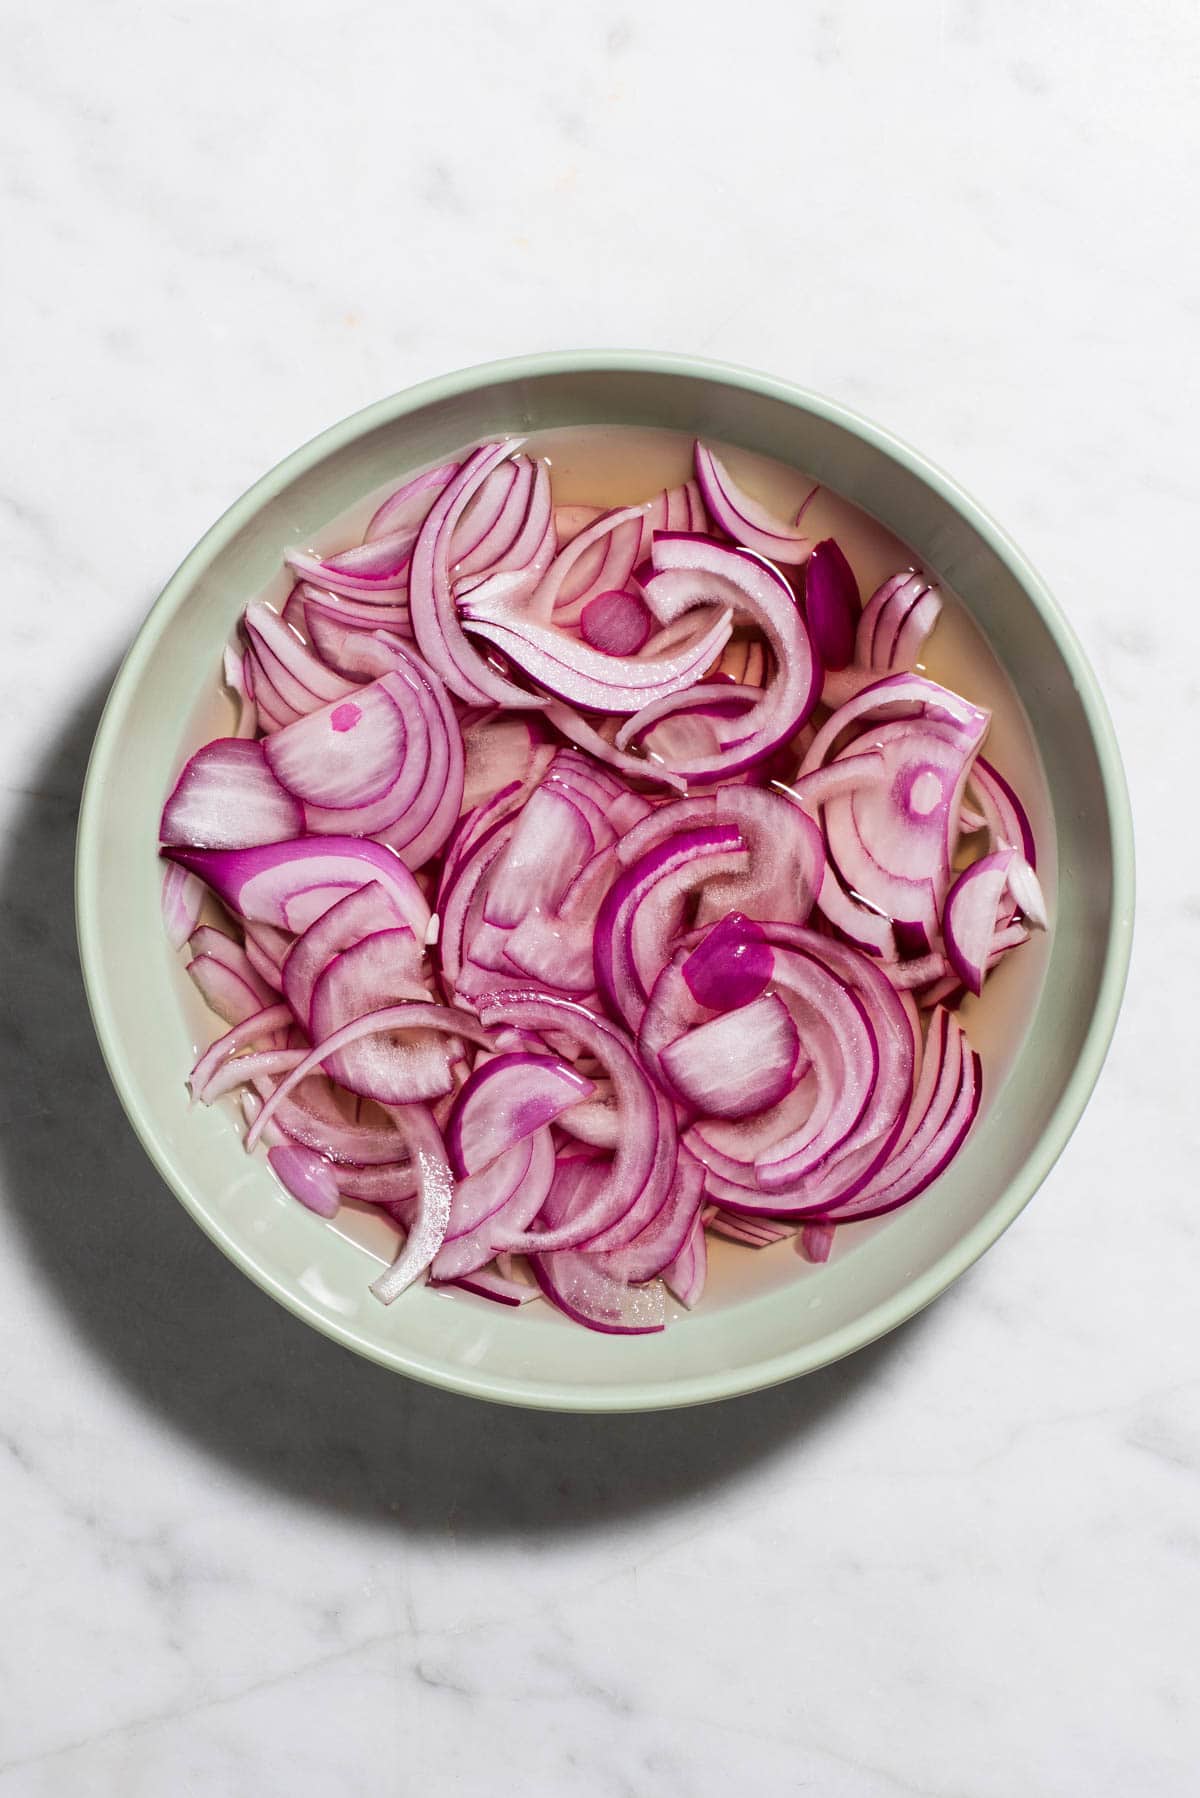 Homemade quick-pickled red onions in a blue bowl.